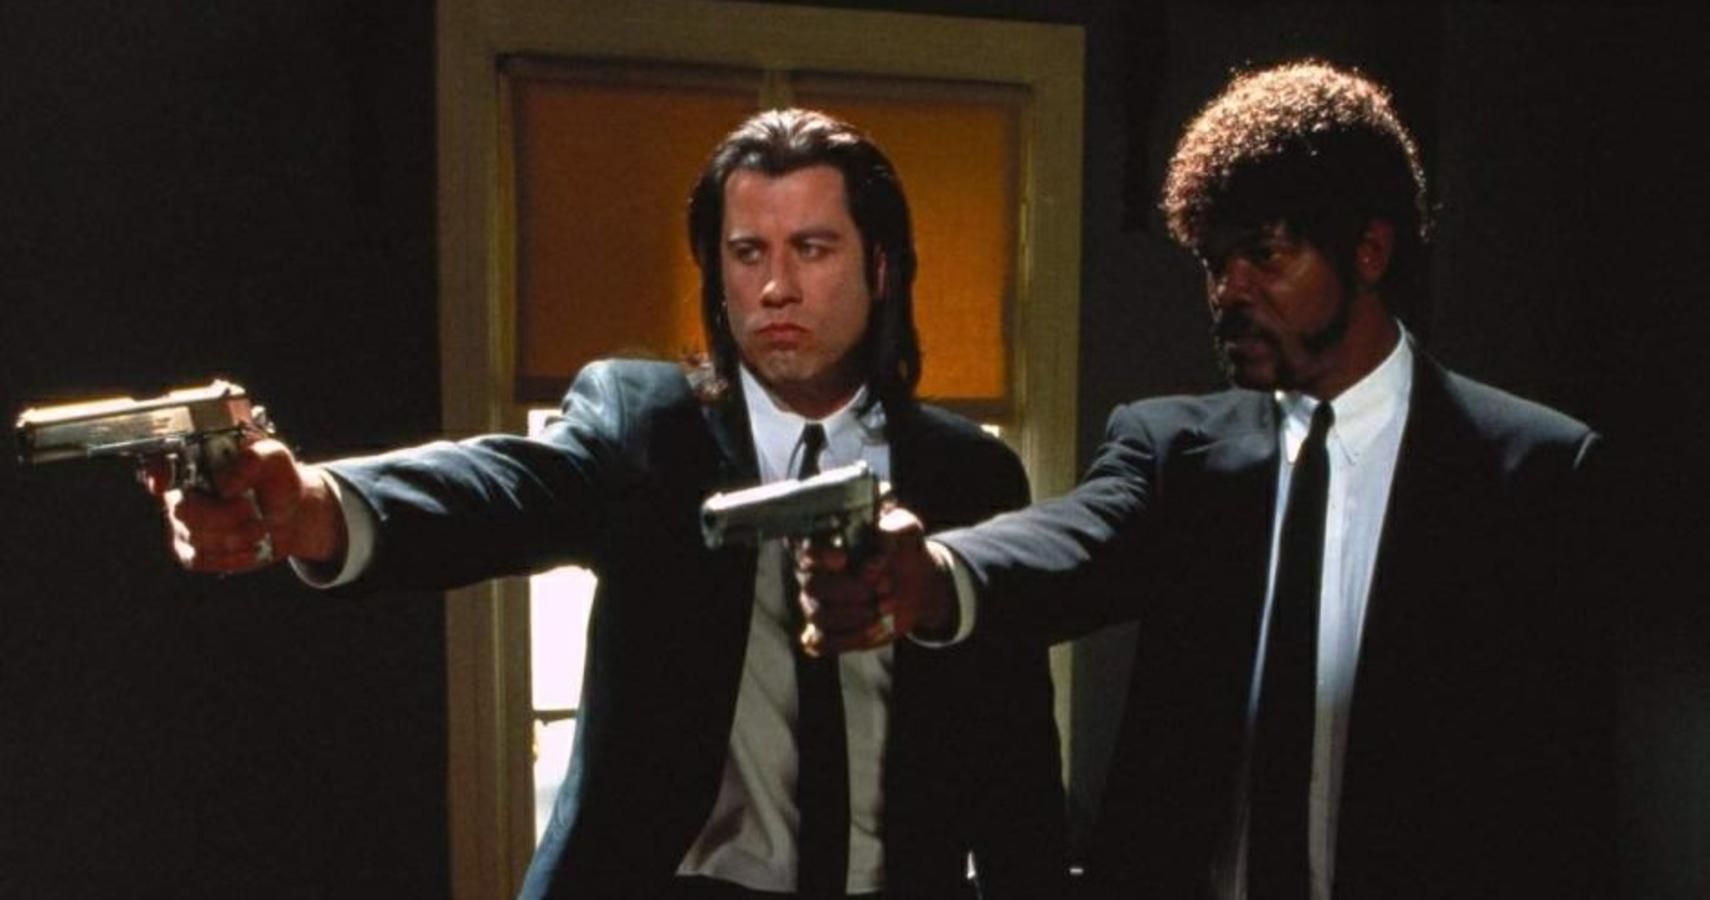 Pulp Fiction 10 Best Quotes From Each Main Character